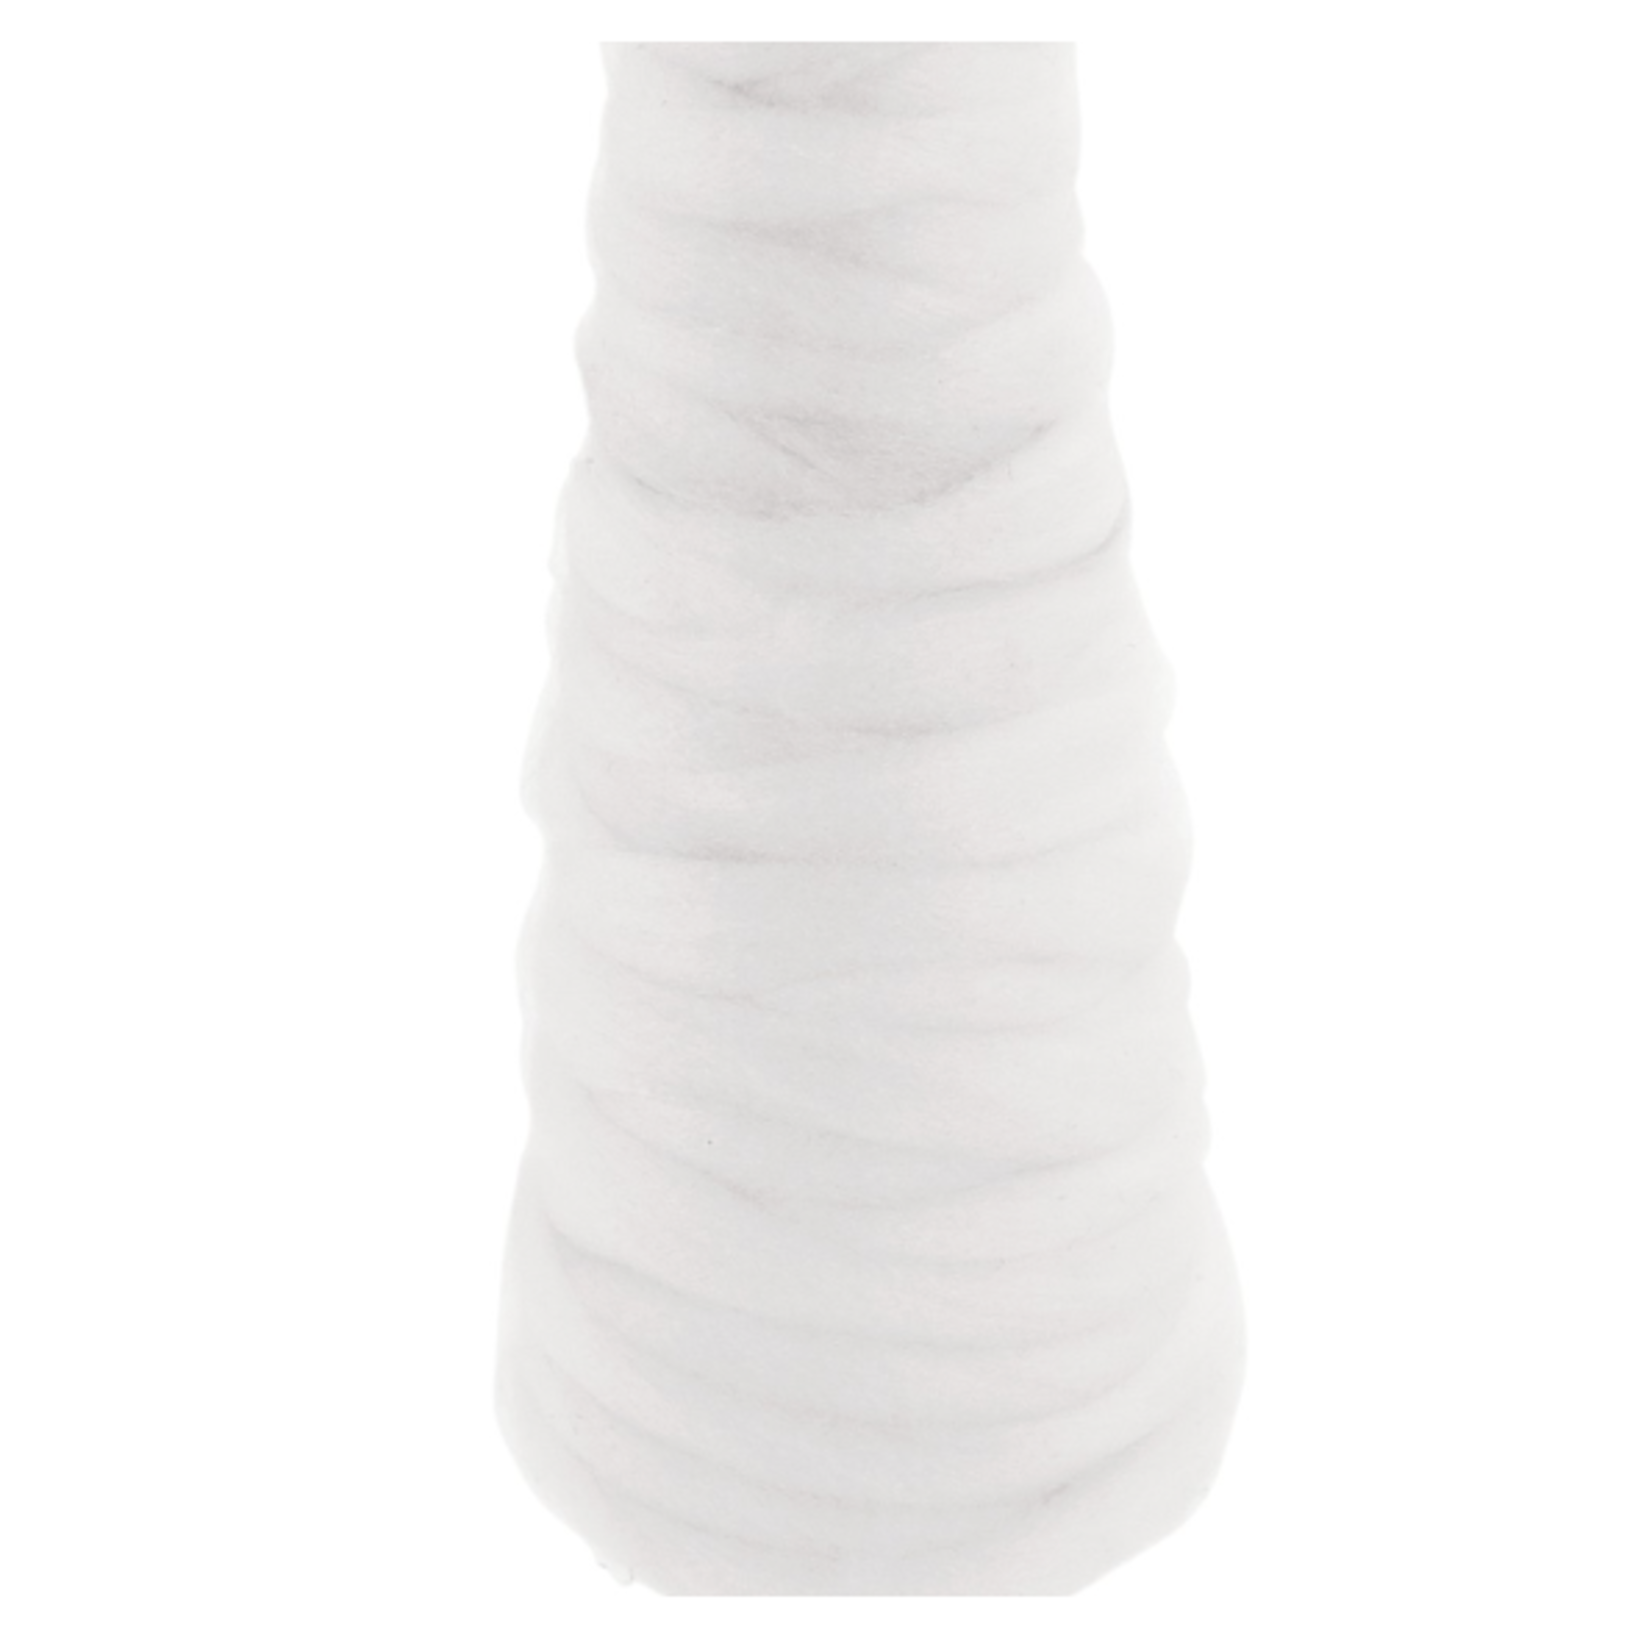 13.8”h x 2.8” WHITE WITH WOOD CHRISTMAS TREE, reg $5.99 30% off